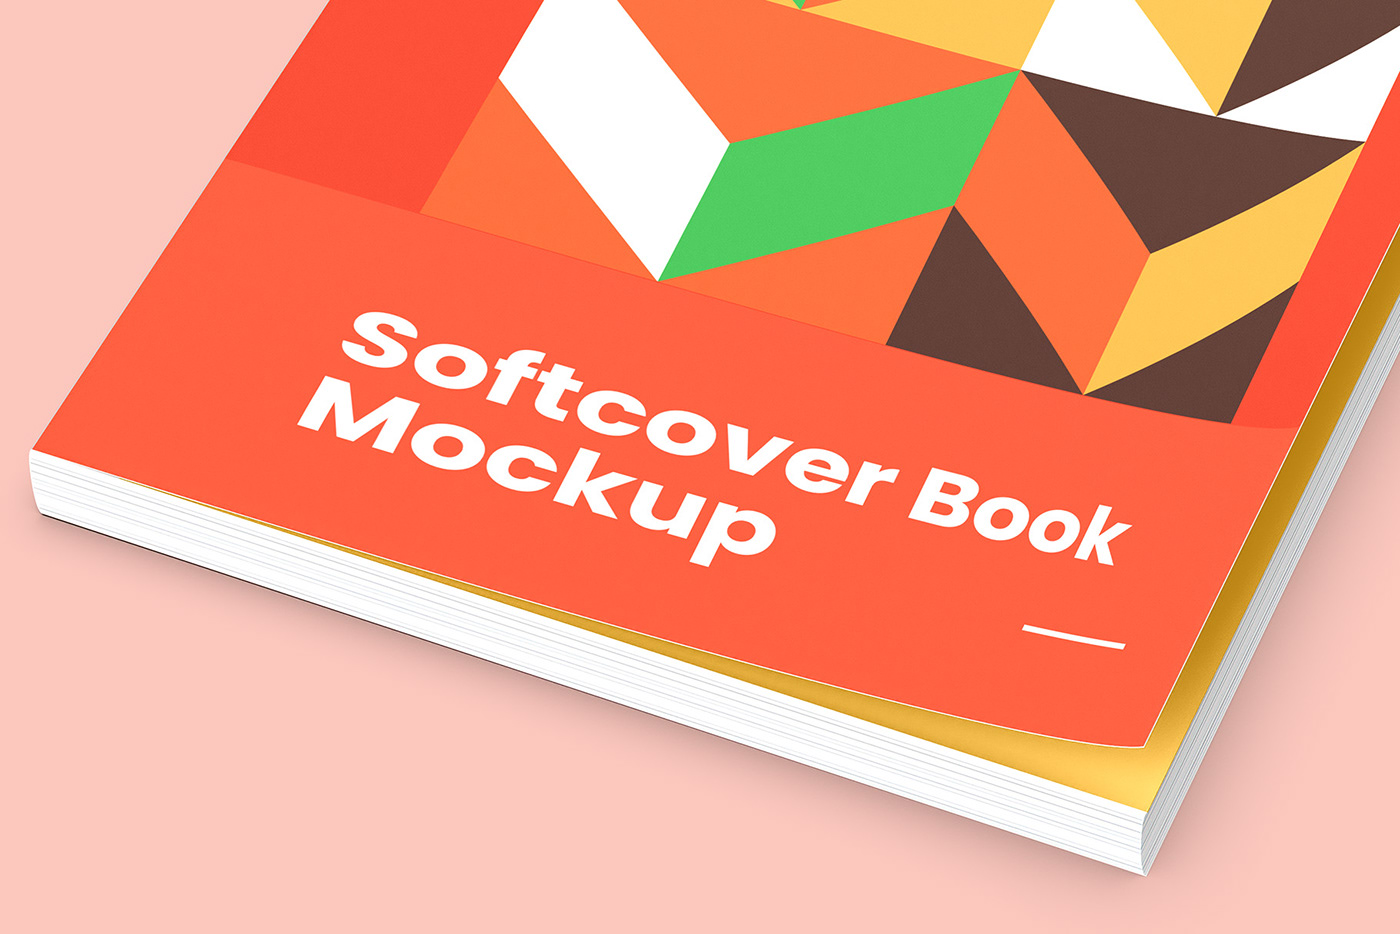 softcover book Mockup paperback brochure page spread cover design ebook print